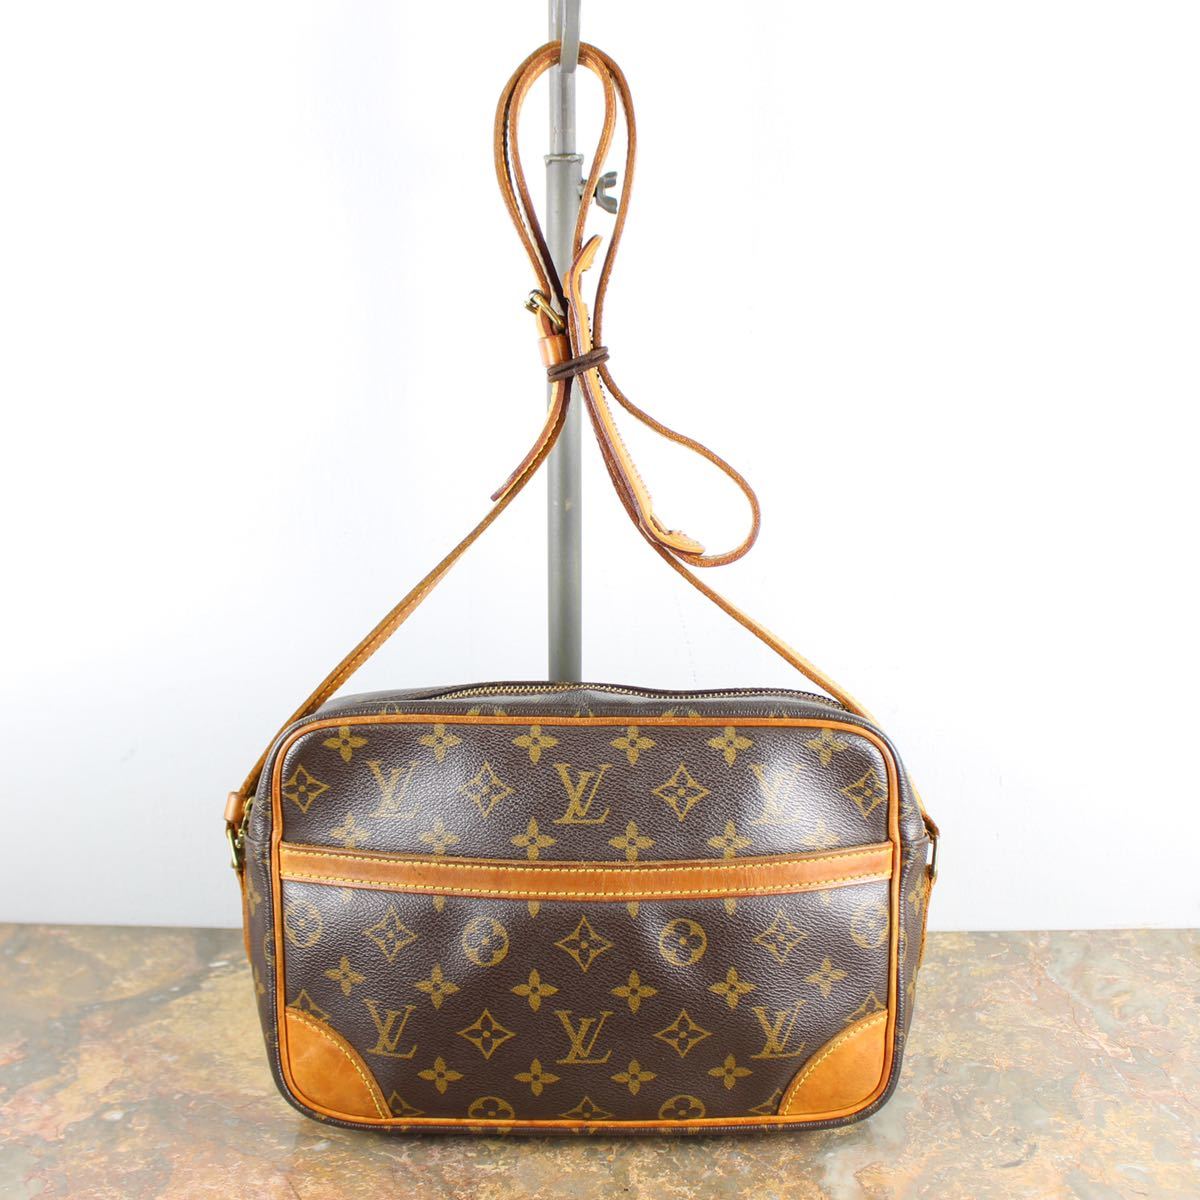 LOUIS VUITTON M51272 MB0044 MONOGRAM PATTERNED SHOULDER BAG MADE IN FRANCE ルイヴィトントロカデロモノグラム柄ショルダーバッグ